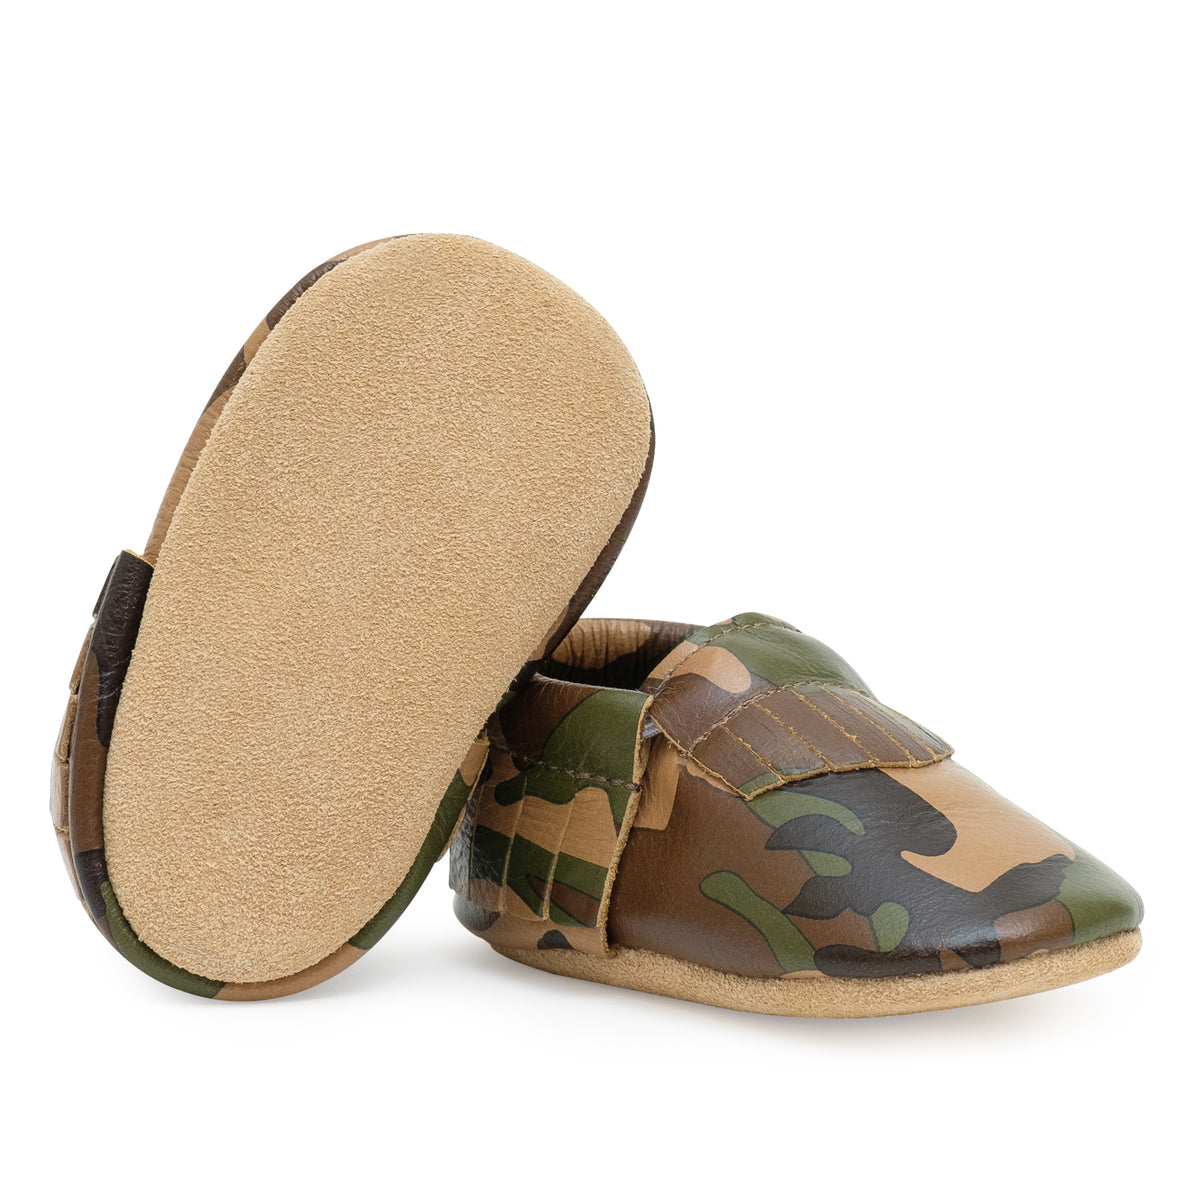 Camo Baby Moccasins